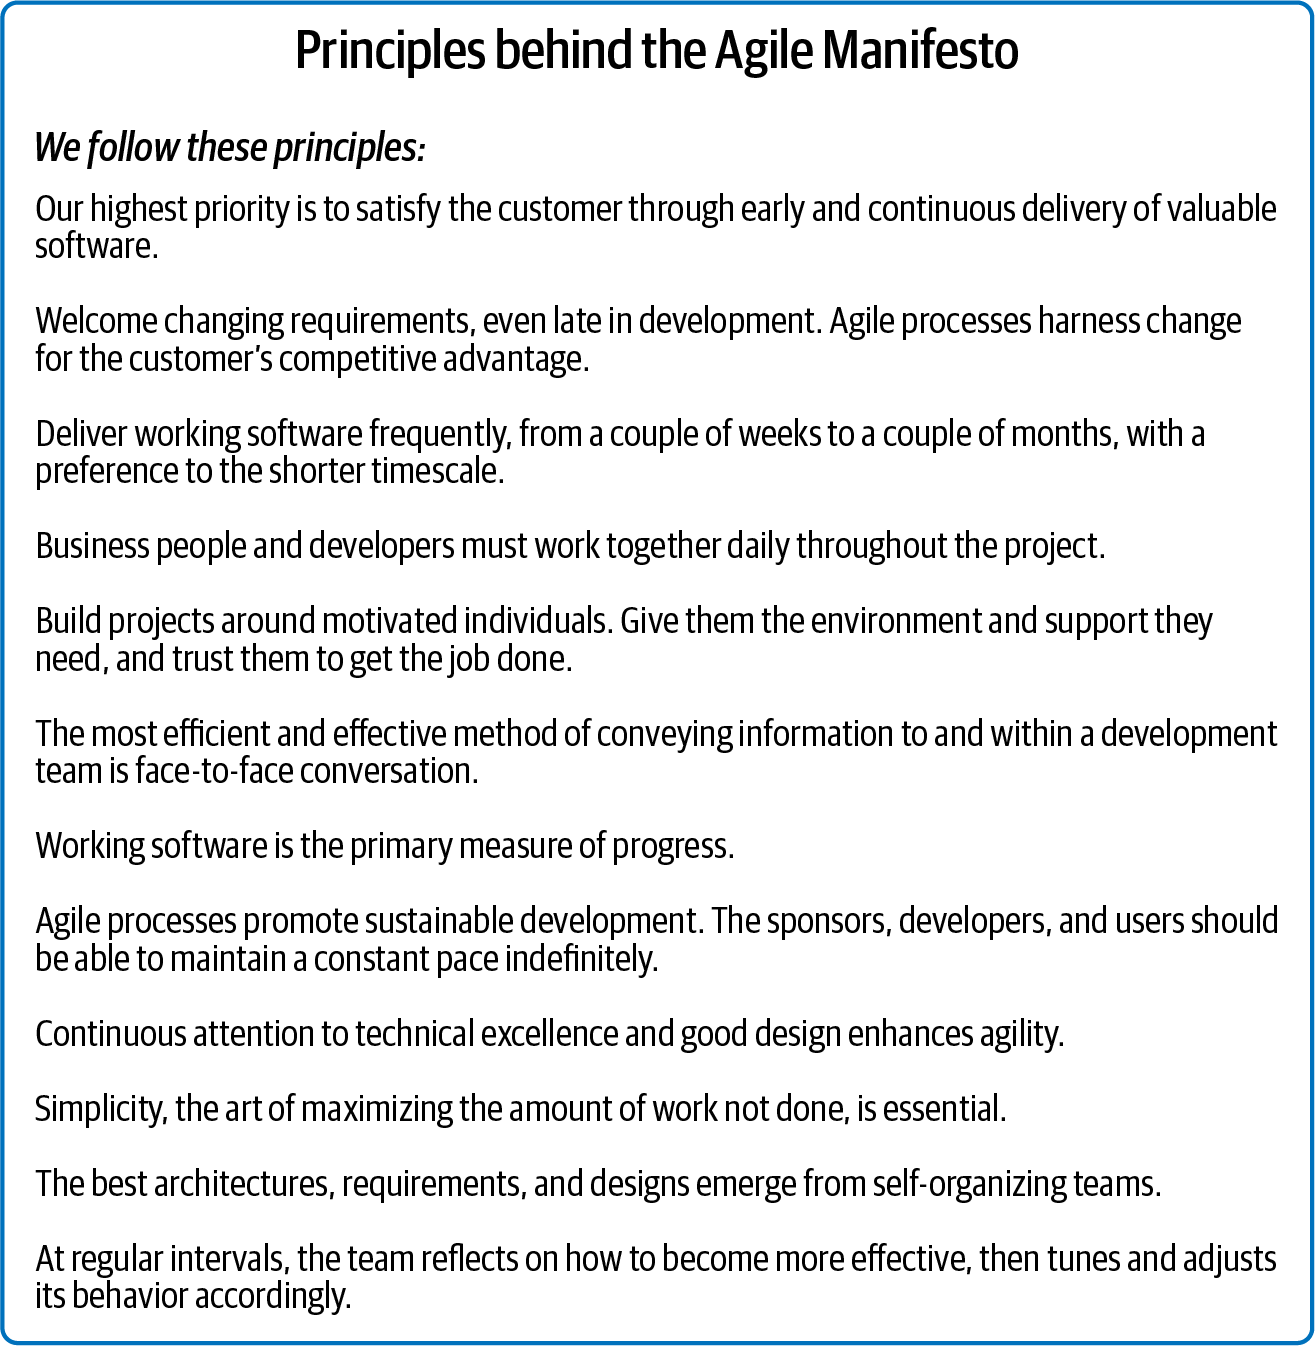 A picture of text with the header “Principles behind the Agile Manifesto”. The body of the text lists 12 principles. They read: “Our highest priority is to satisfy the customer through early and continuous delivery of valuable software.” “Welcome changing requirements, even late in development. Agile processes harness change for the customer’s competitive advantage.” “Deliver working software frequently, from a couple of weeks to a couple of months, with a preference to the shorter timescale.” “Business people and developers must work together daily throughout the project.” “Build projects around motivated individuals. Give them the environment and support they need, and trust them to get the job done.” “The most efficient and effective method of conveying information to and within a development team is face-to-face conversation.” “Working software is the primary measure of progress.” “Agile processes promote sustainable development. The sponsors, developers, and users should be able to maintain a constant pace indefinitely.” “Continuous attention to technical excellence and good design enhances agility.” “Simplicity, the art of maximizing the amount of work not done, is essential.” “The best architectures, requirements, and designs emerge from self-organizing teams.” “At regular intervals, the team reflects on how to become more effective, then tunes and adjusts its behavior accordingly.”